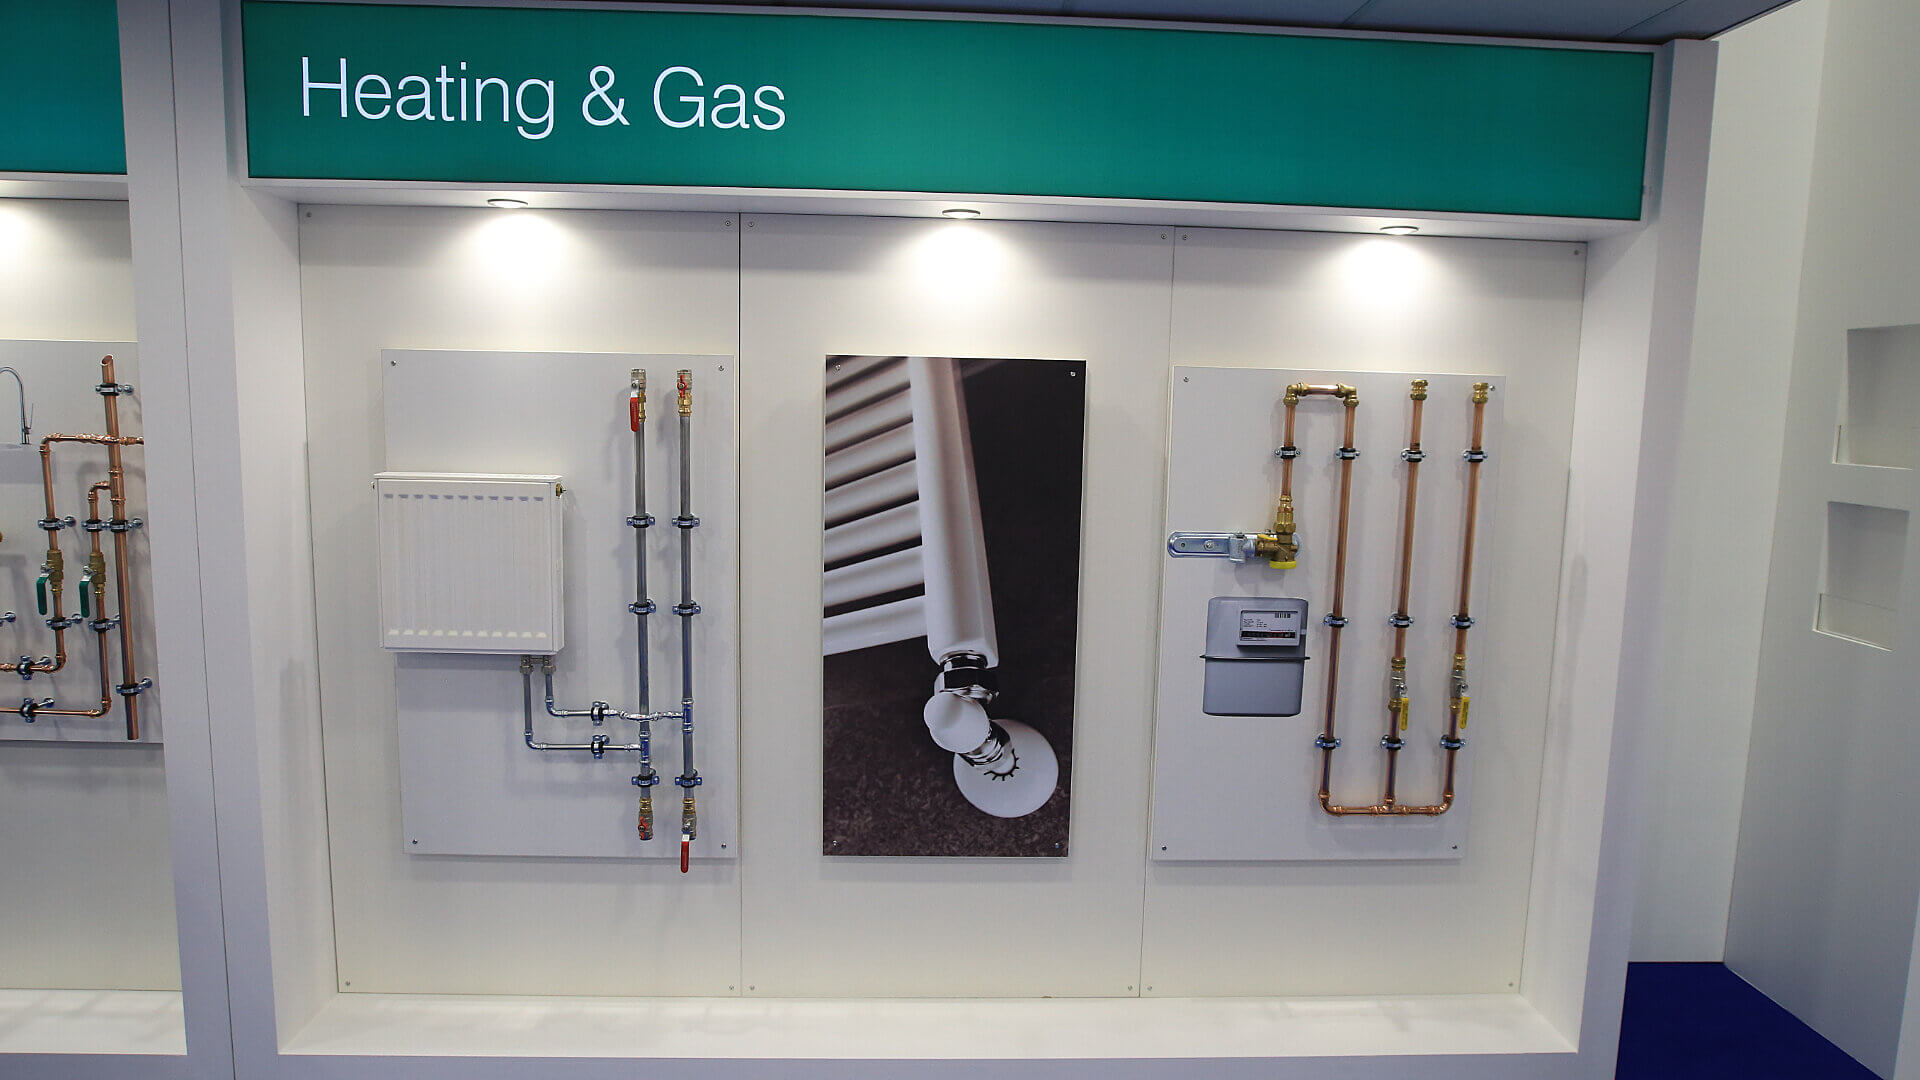 ibp heating and gas fitting display